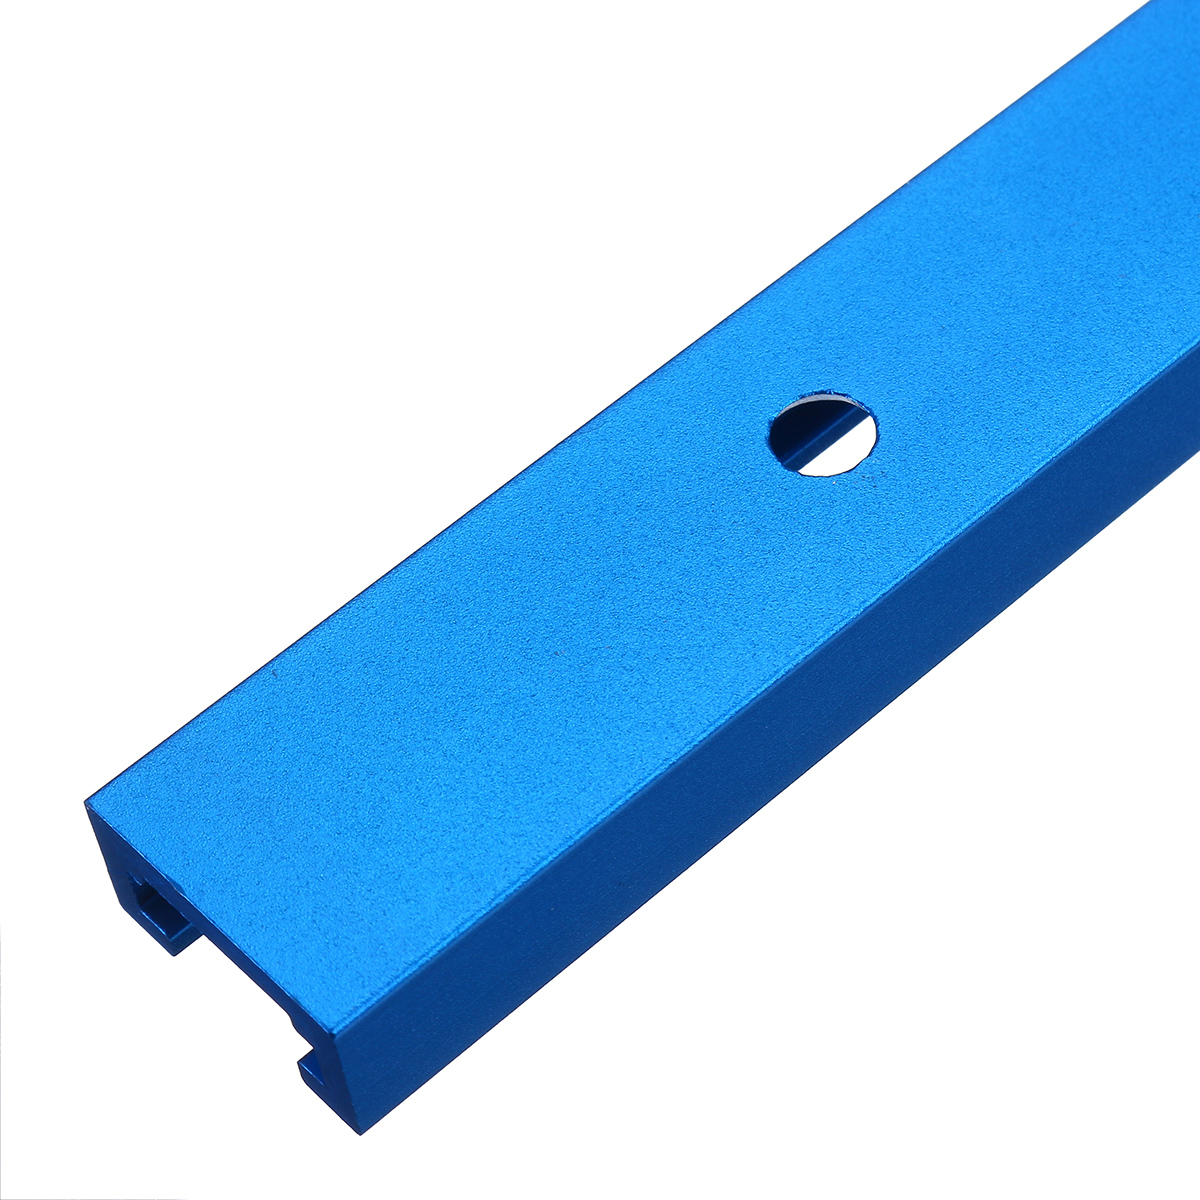 300-600mm-Aluminium-Alloy-T-track-T-slot-Miter-Track-Woodworking-Tool-for-Workbench-Router-Table-1770914-6